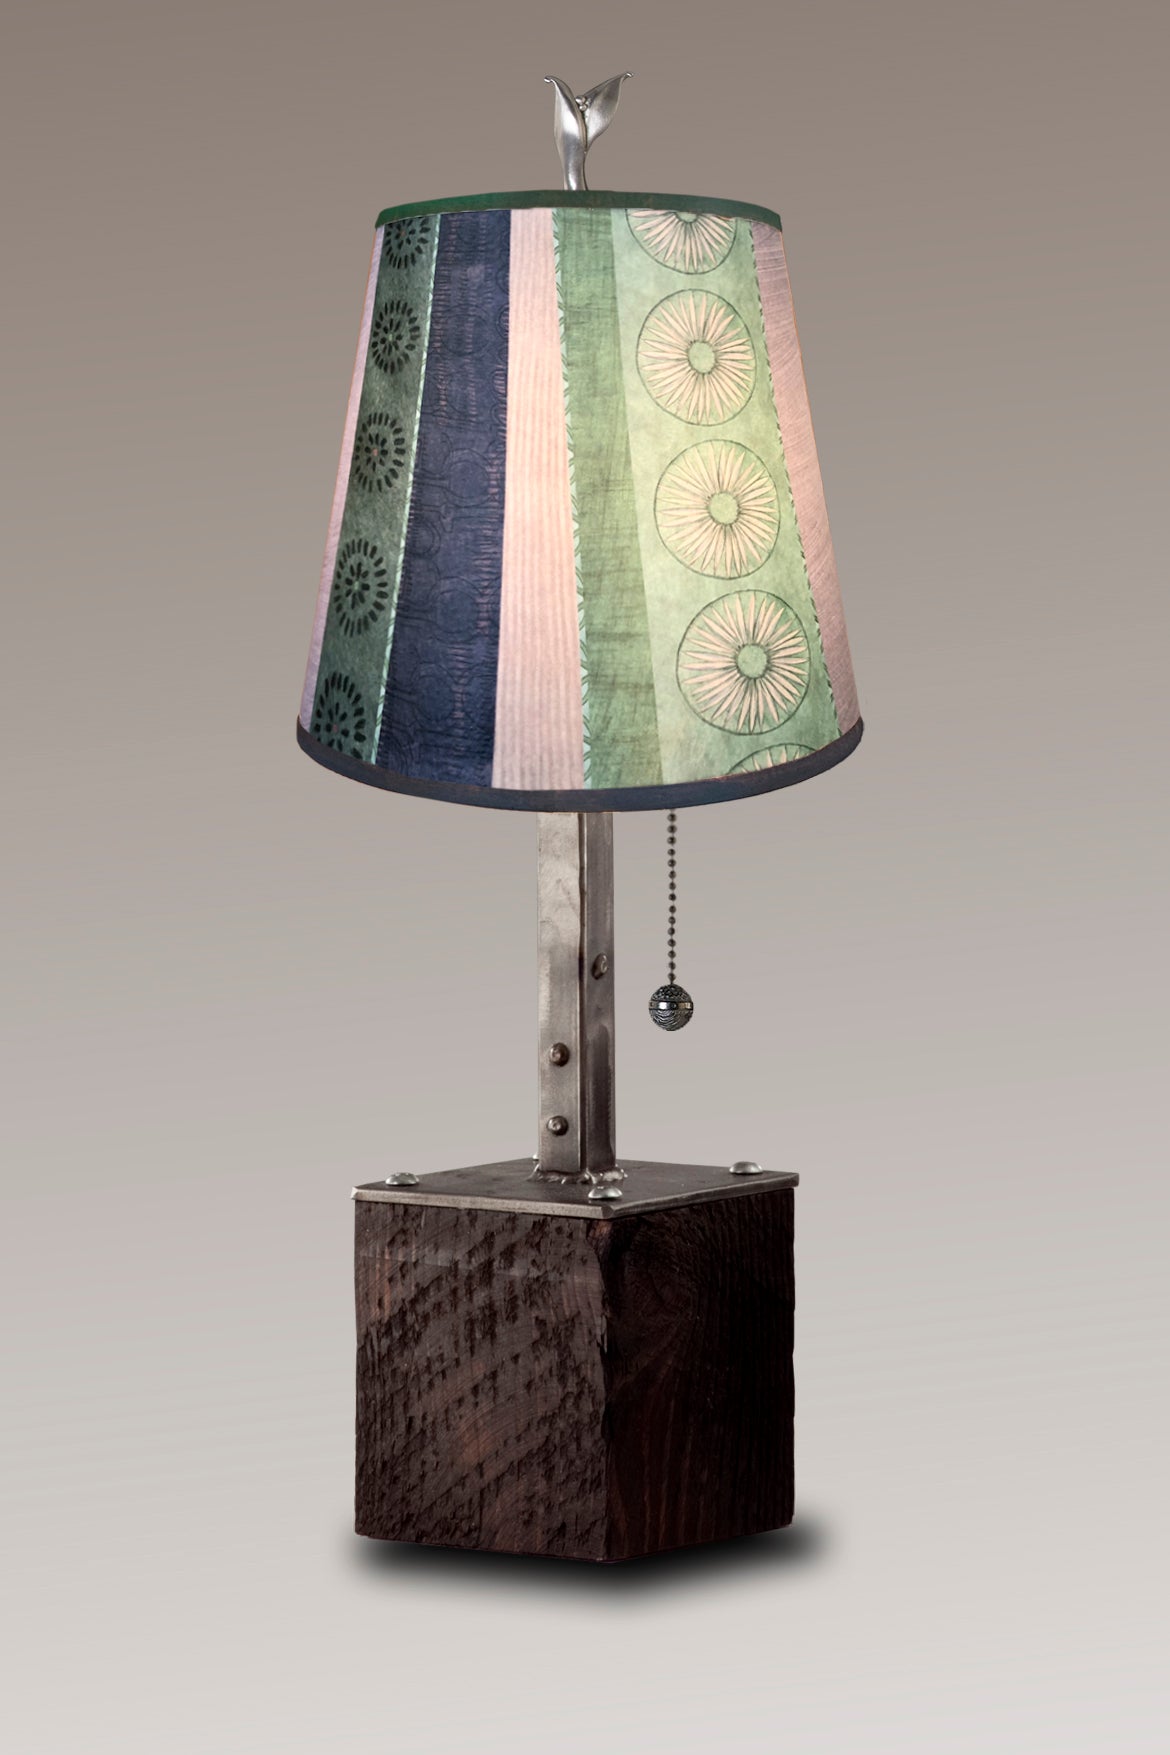 Janna Ugone & Co Table Lamps Steel Table Lamp on Reclaimed Wood with Small Drum Shade in Serape Waters